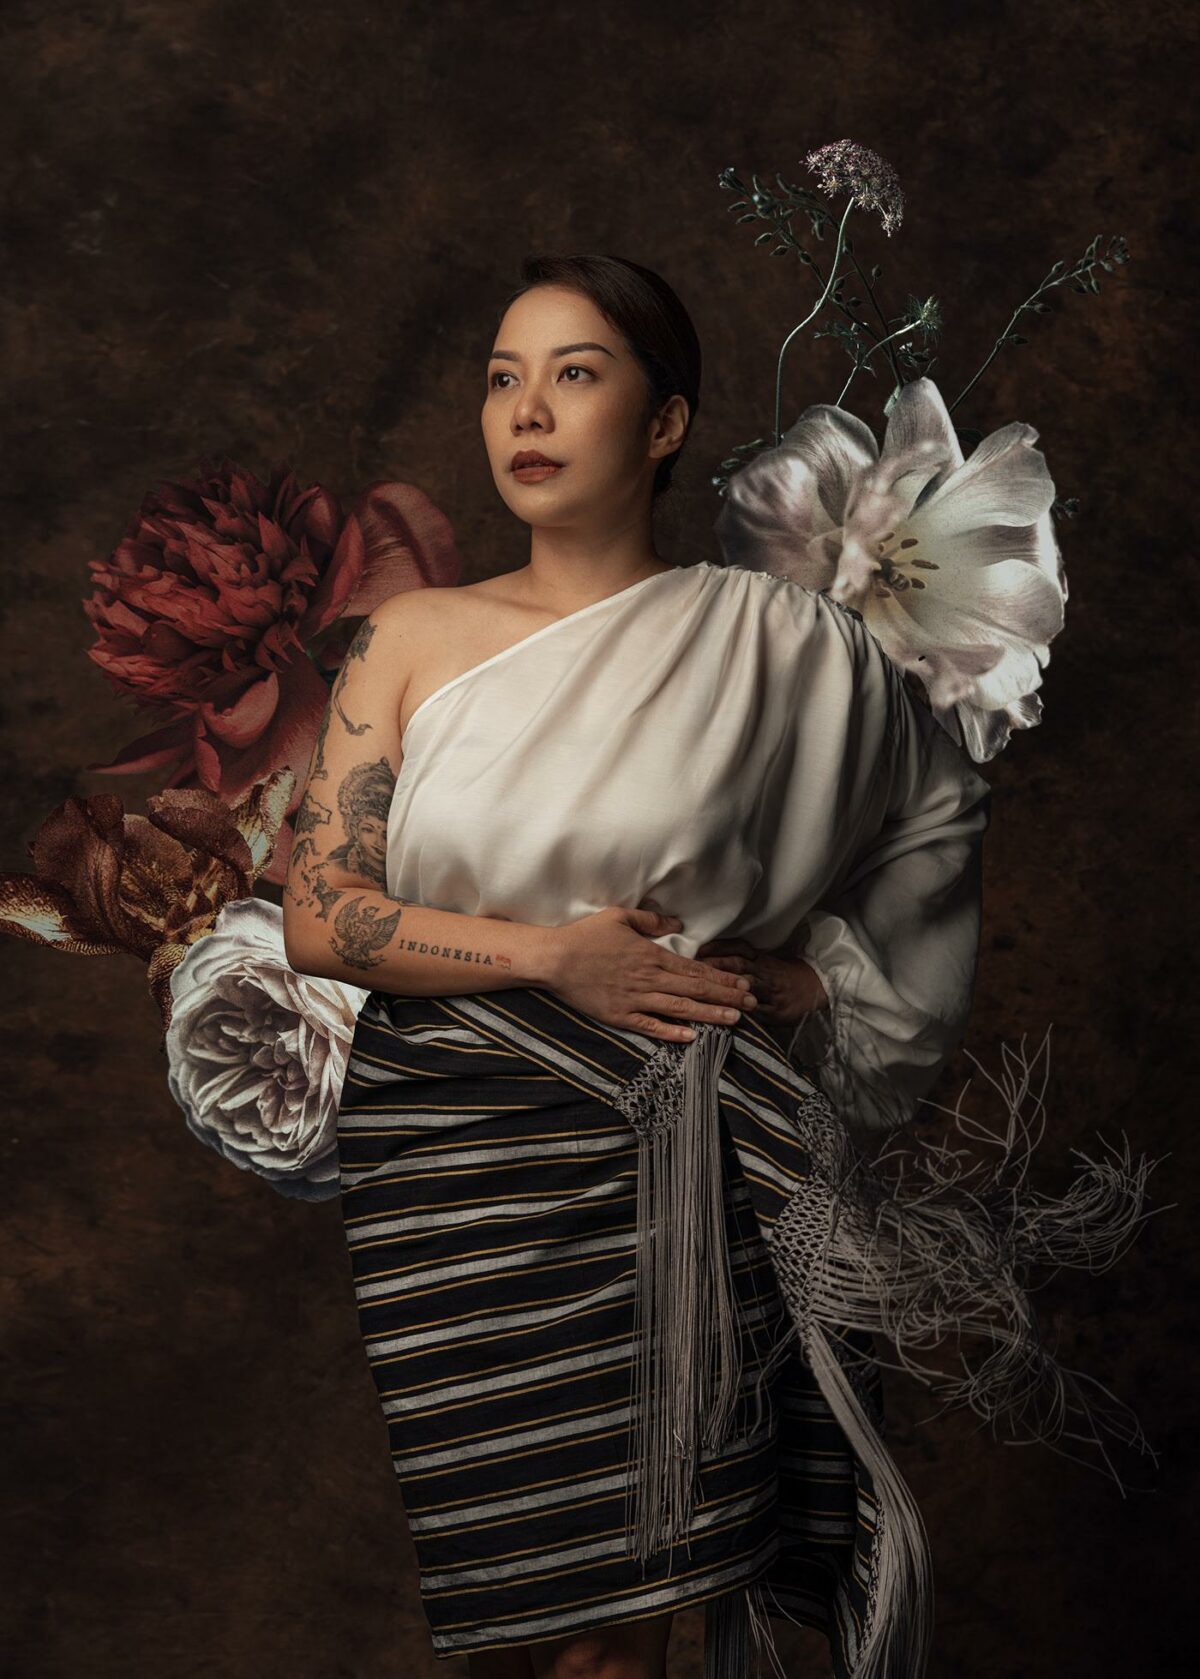 Project Puan A Gorgeous And Delicate Portrait Series On Indonesian Women By Nicoline Patricia Malina 1